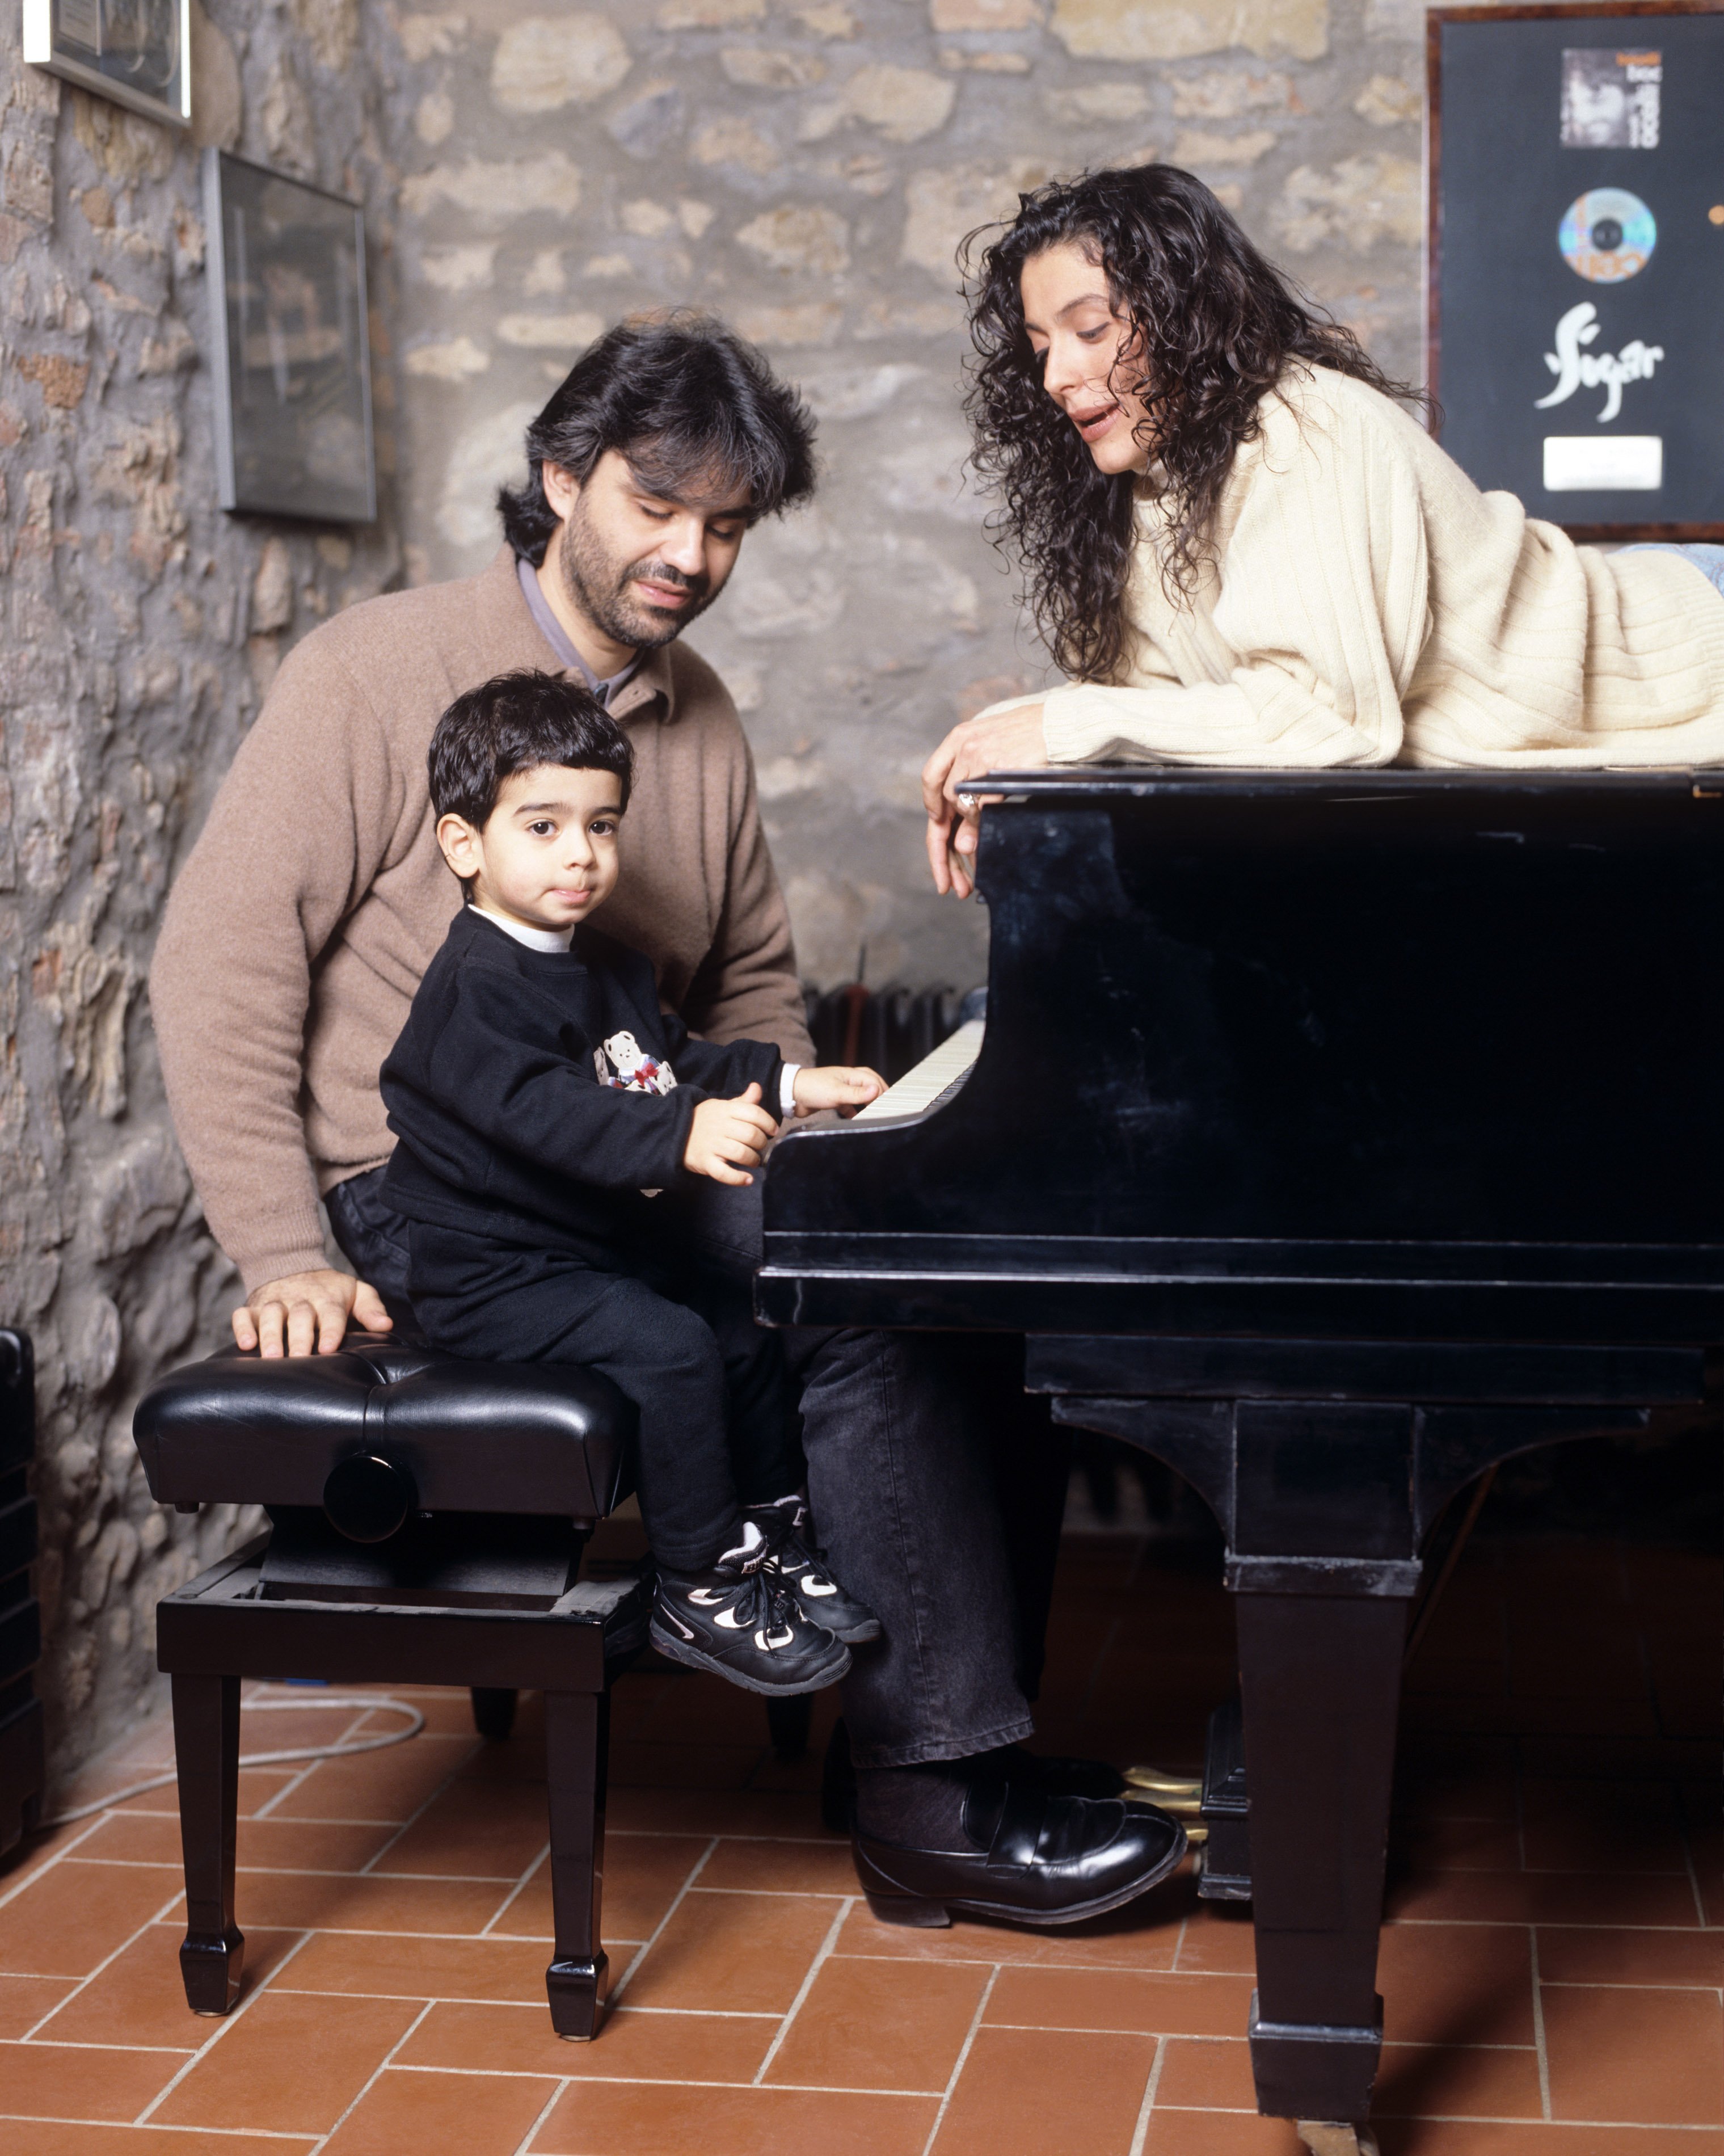 Andrea Bocelli, Enrica Cenzatti and their son, Amos, in their home in Tuscany, Italy, in 1997. | Source: Getty Images